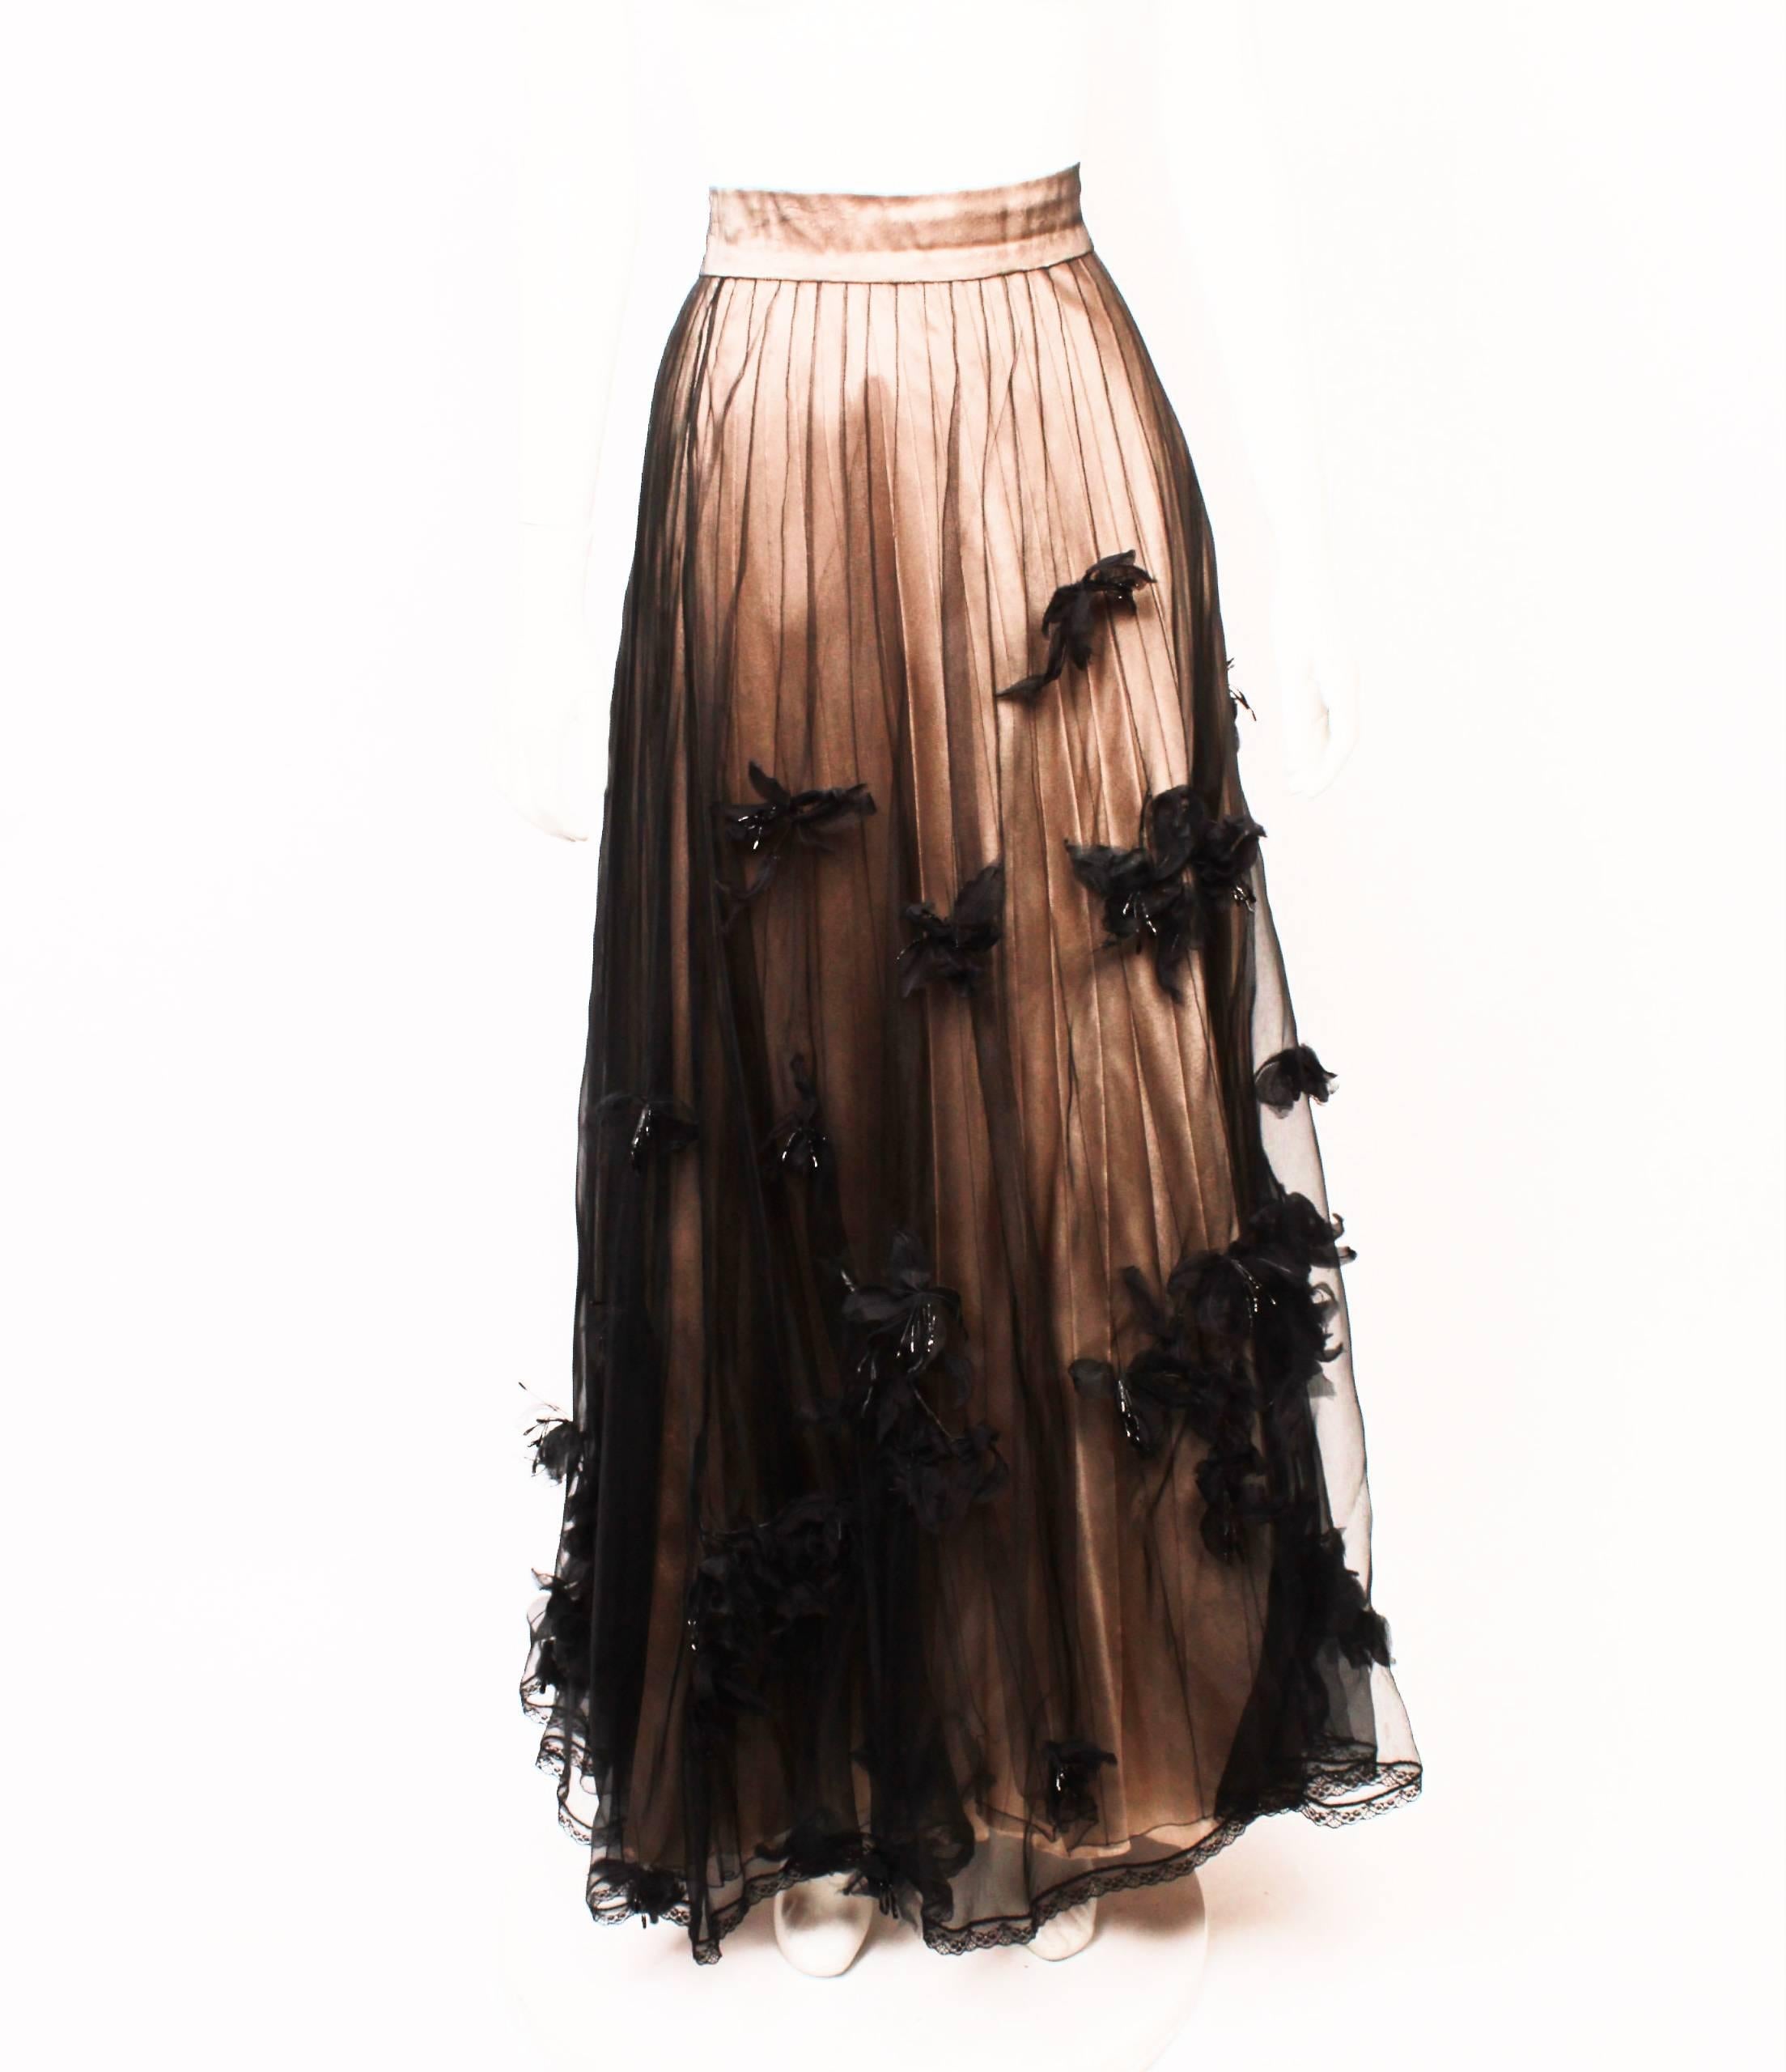 Chanel sheer silk organza evening skirt with silk flowers. 
Beautiful full length evening skirt. Layers of silk organza and tulle with lace detail and appliquéd flowers. Black sheer layers gently fall over layers of a nude silk and lace underskirt.  